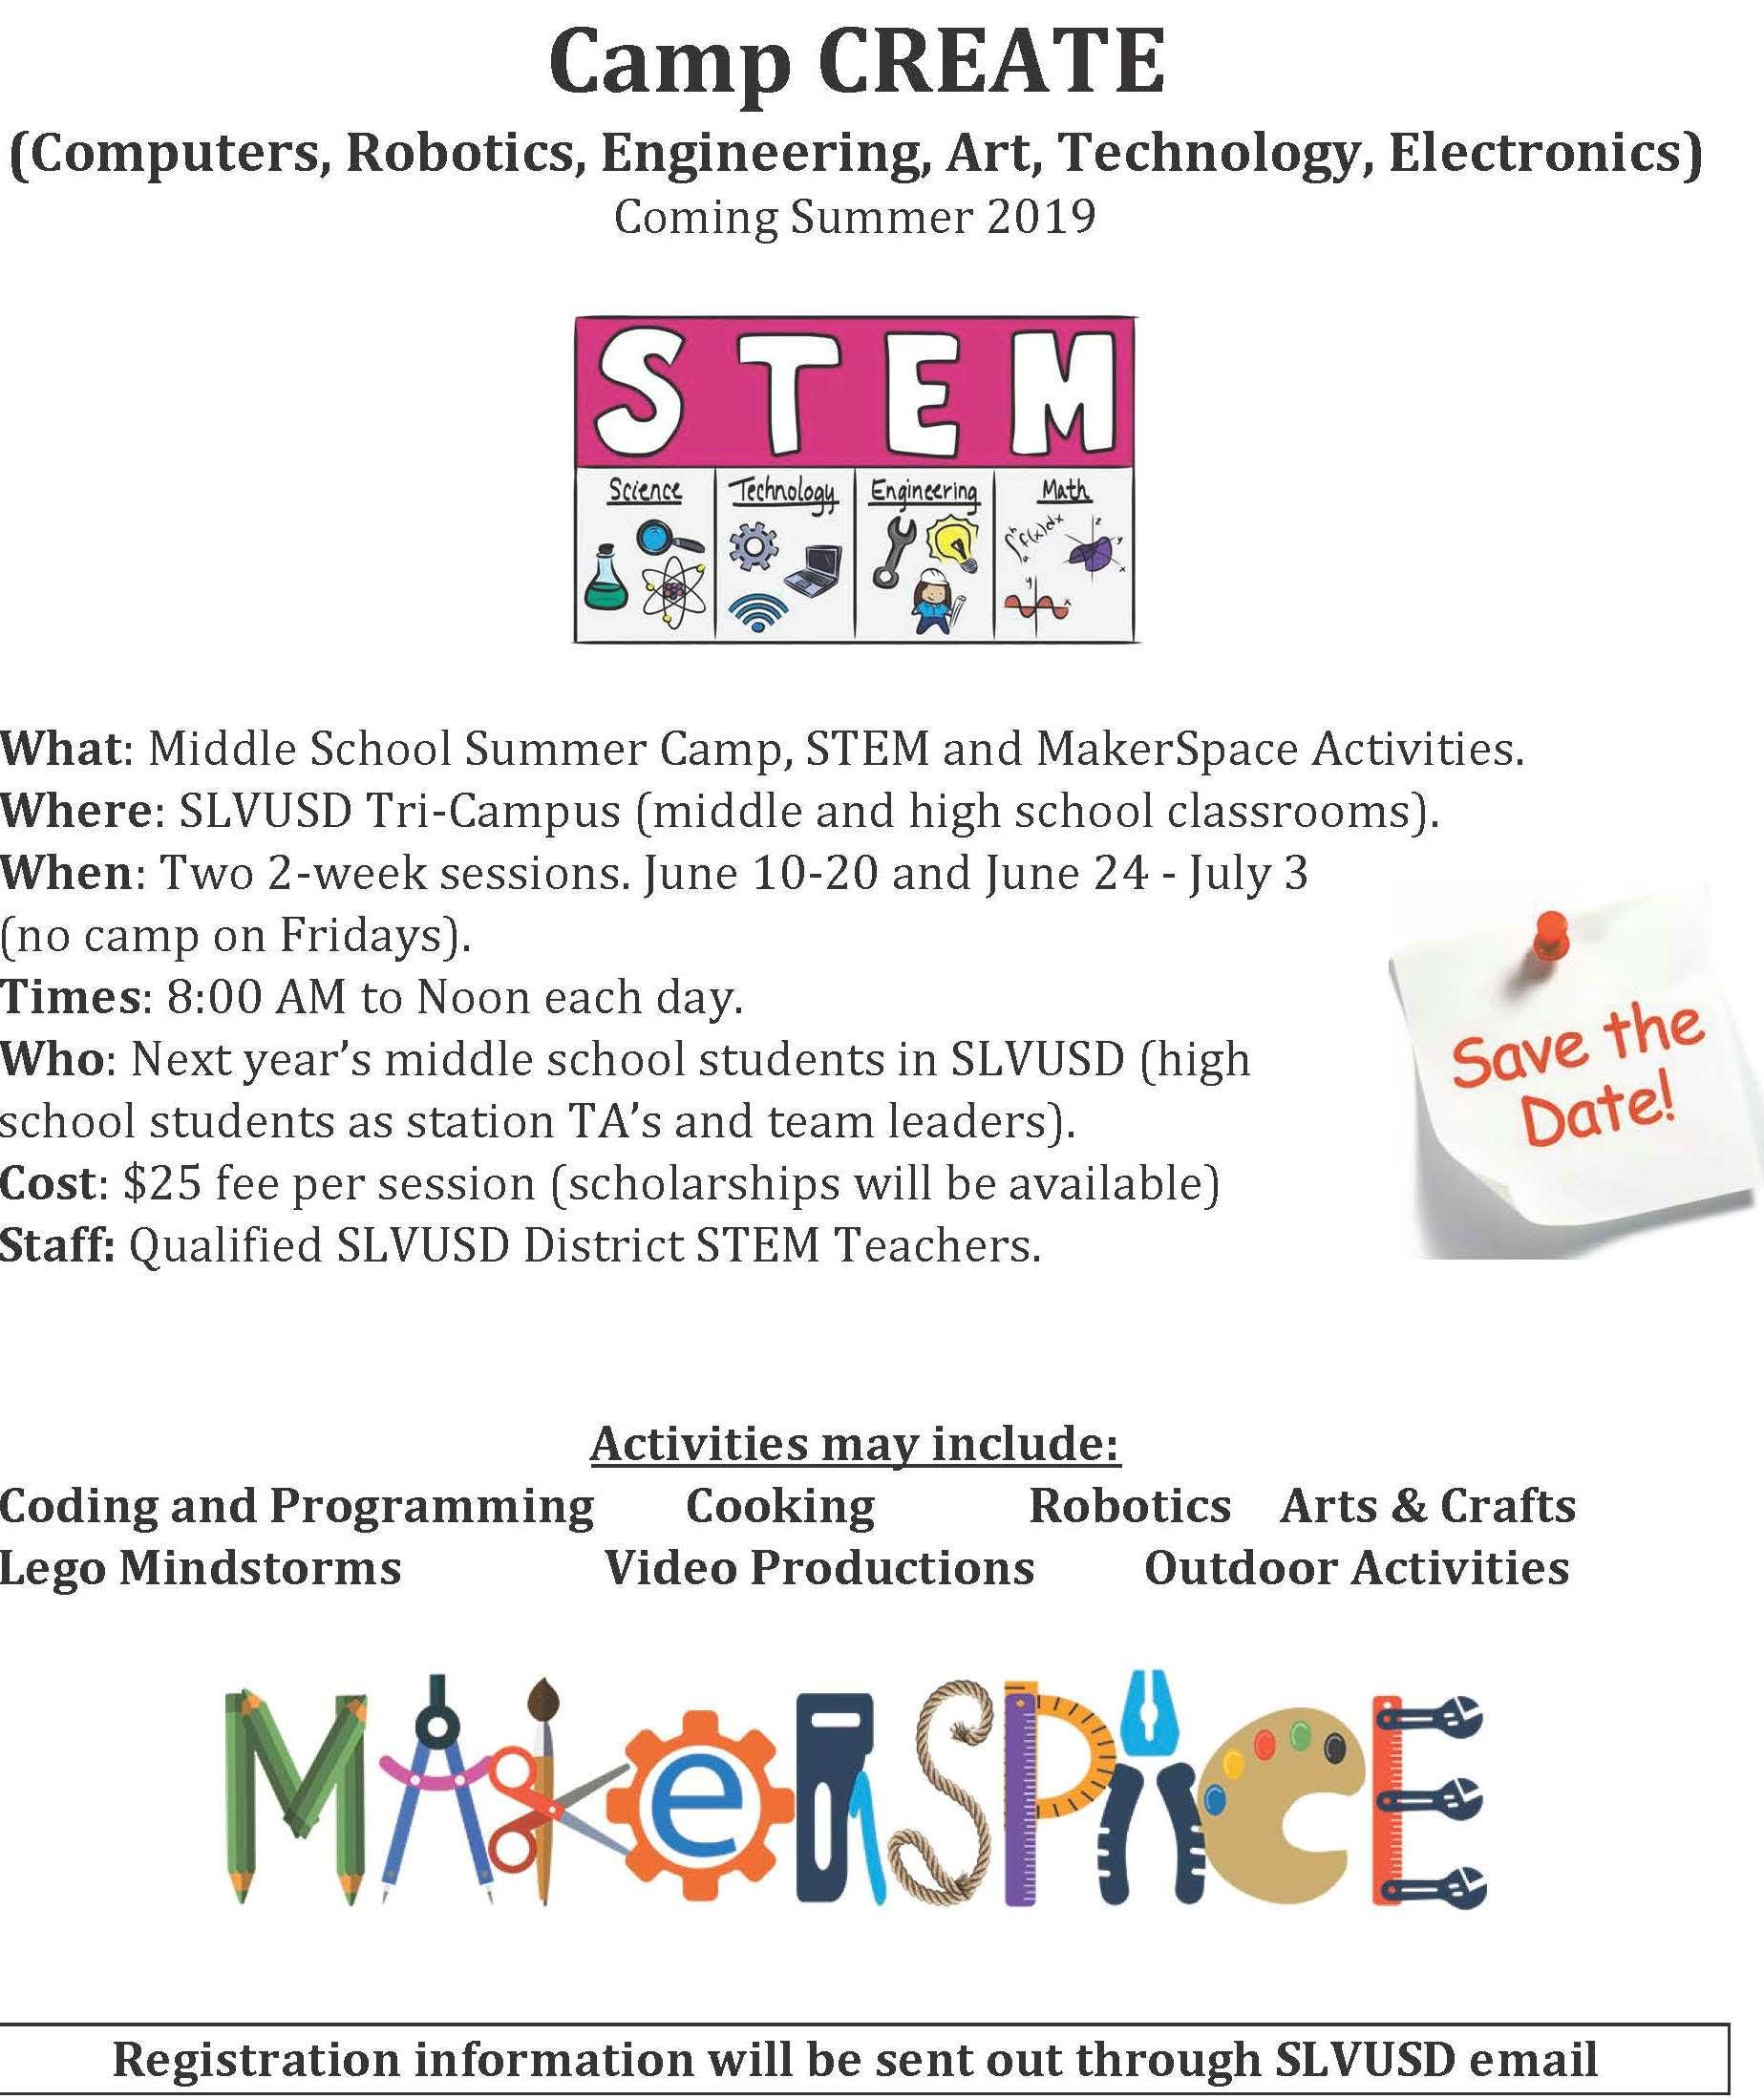 Middle school summer camp, stem and makerspace activities, call 336-8852 for details